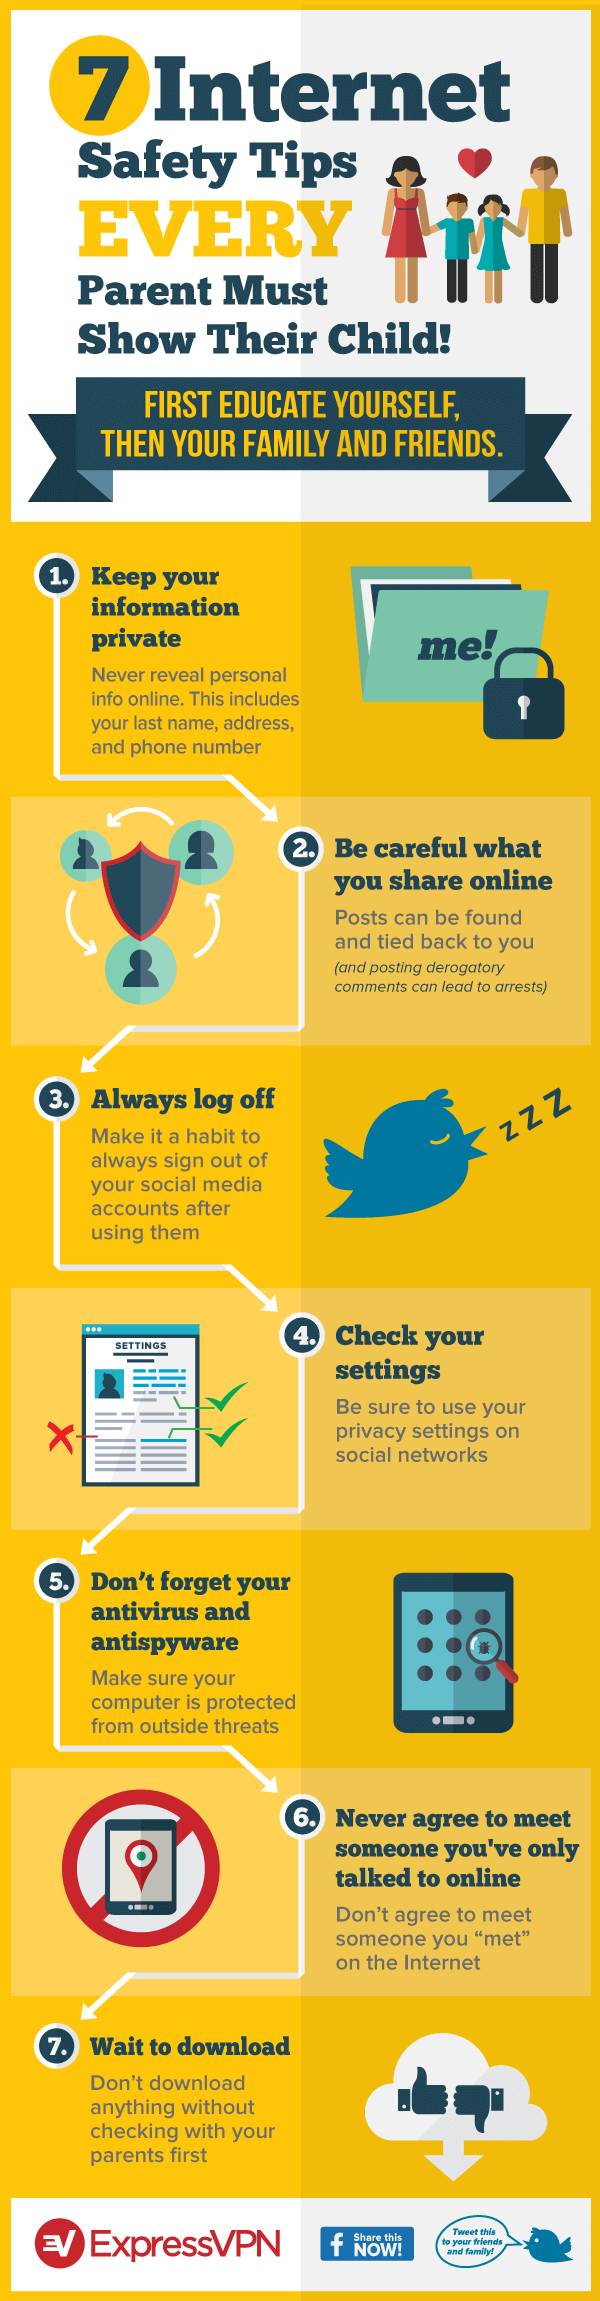 Infographic on Internet safety tips for kids